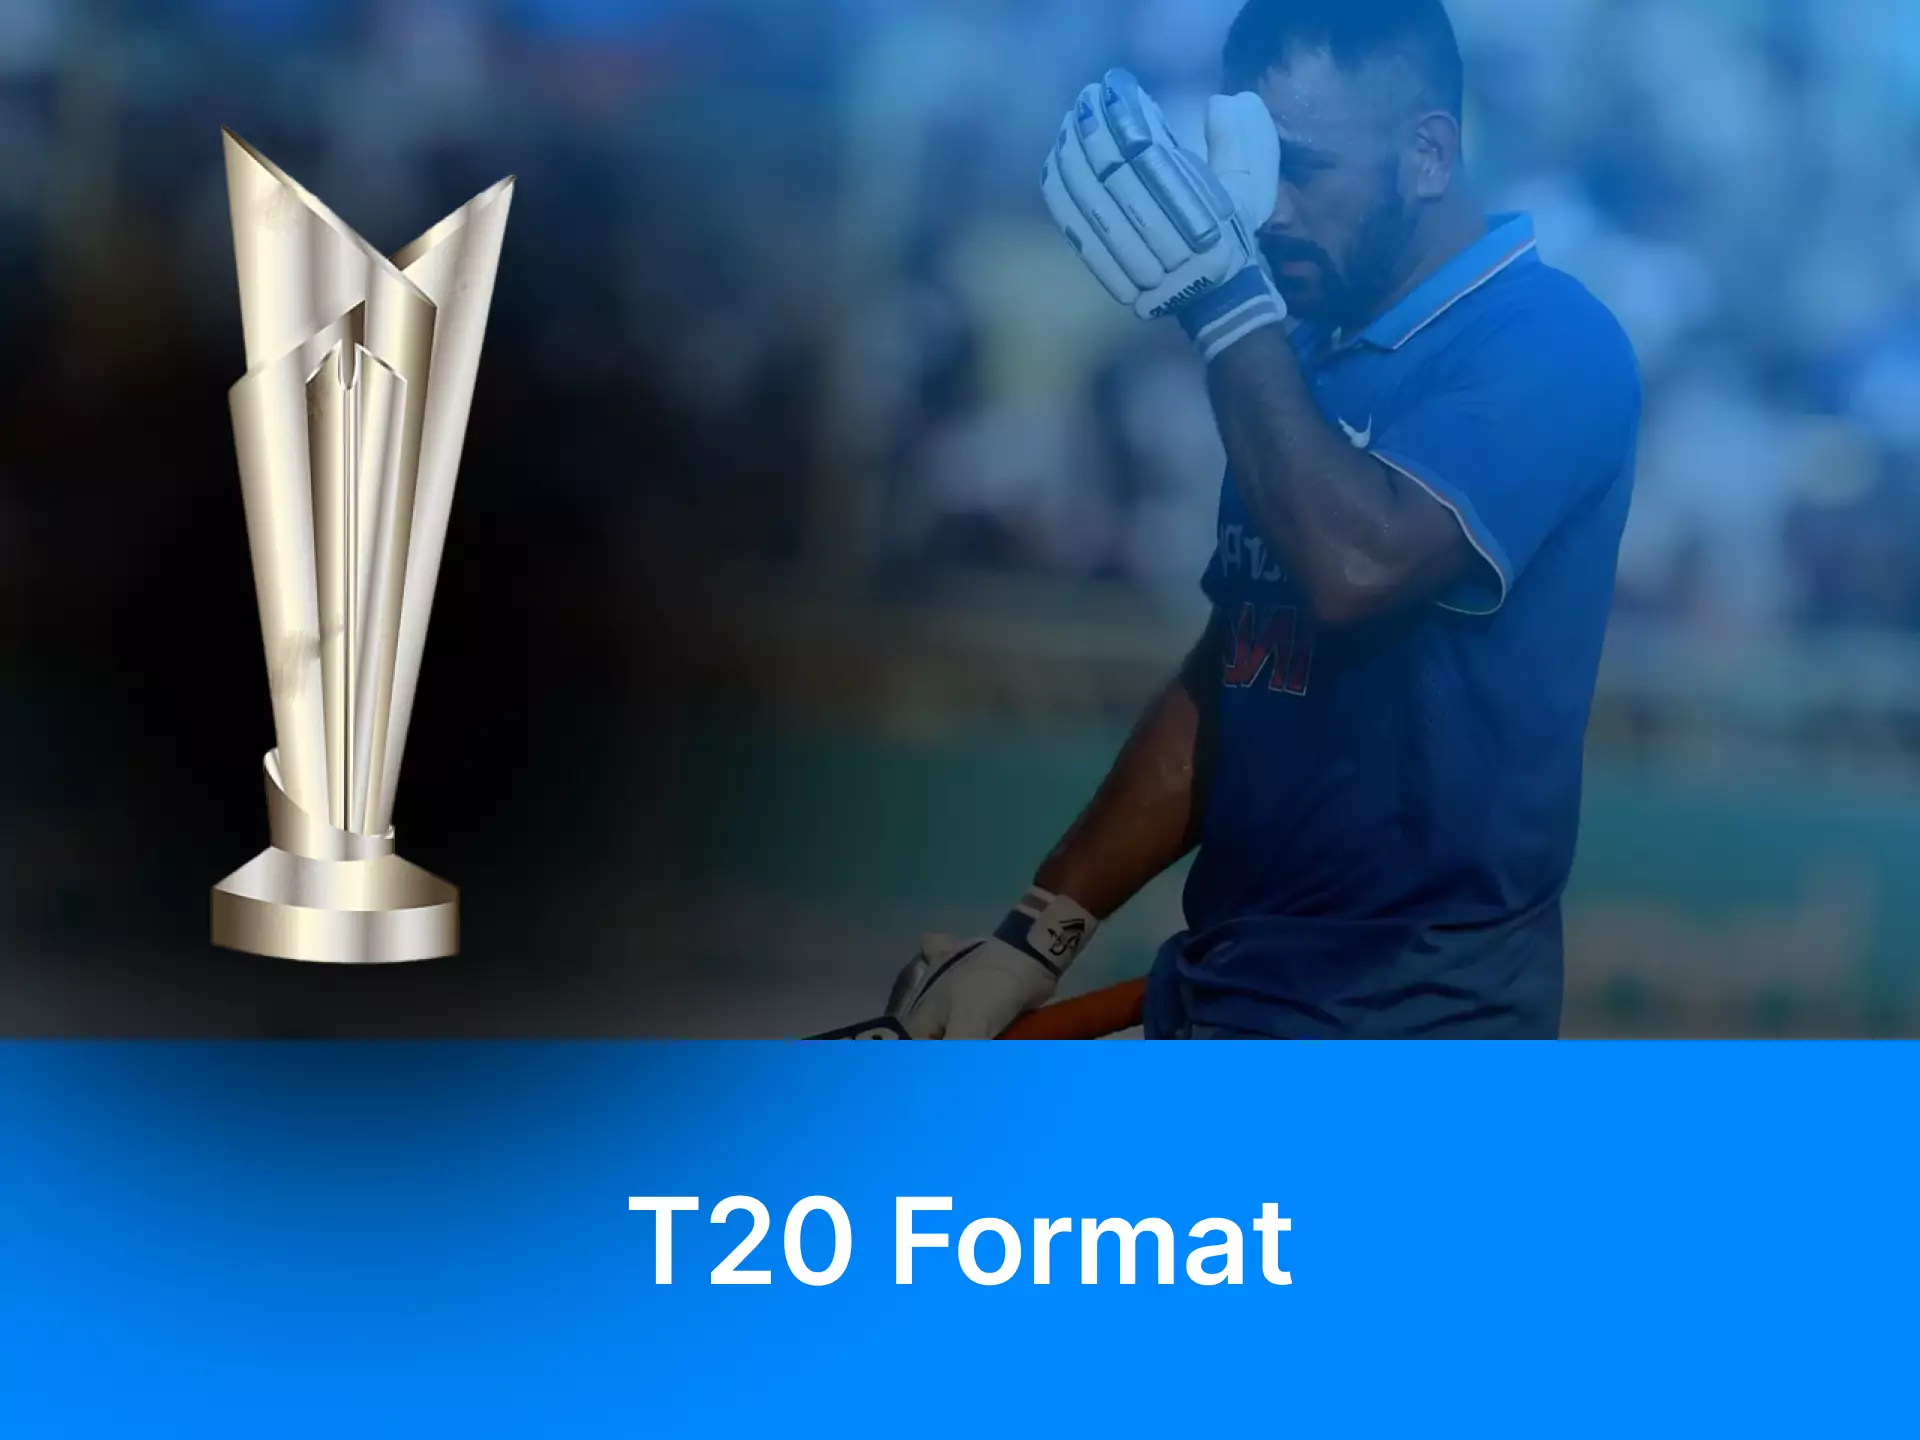 Get to know the T20 format in cricket.